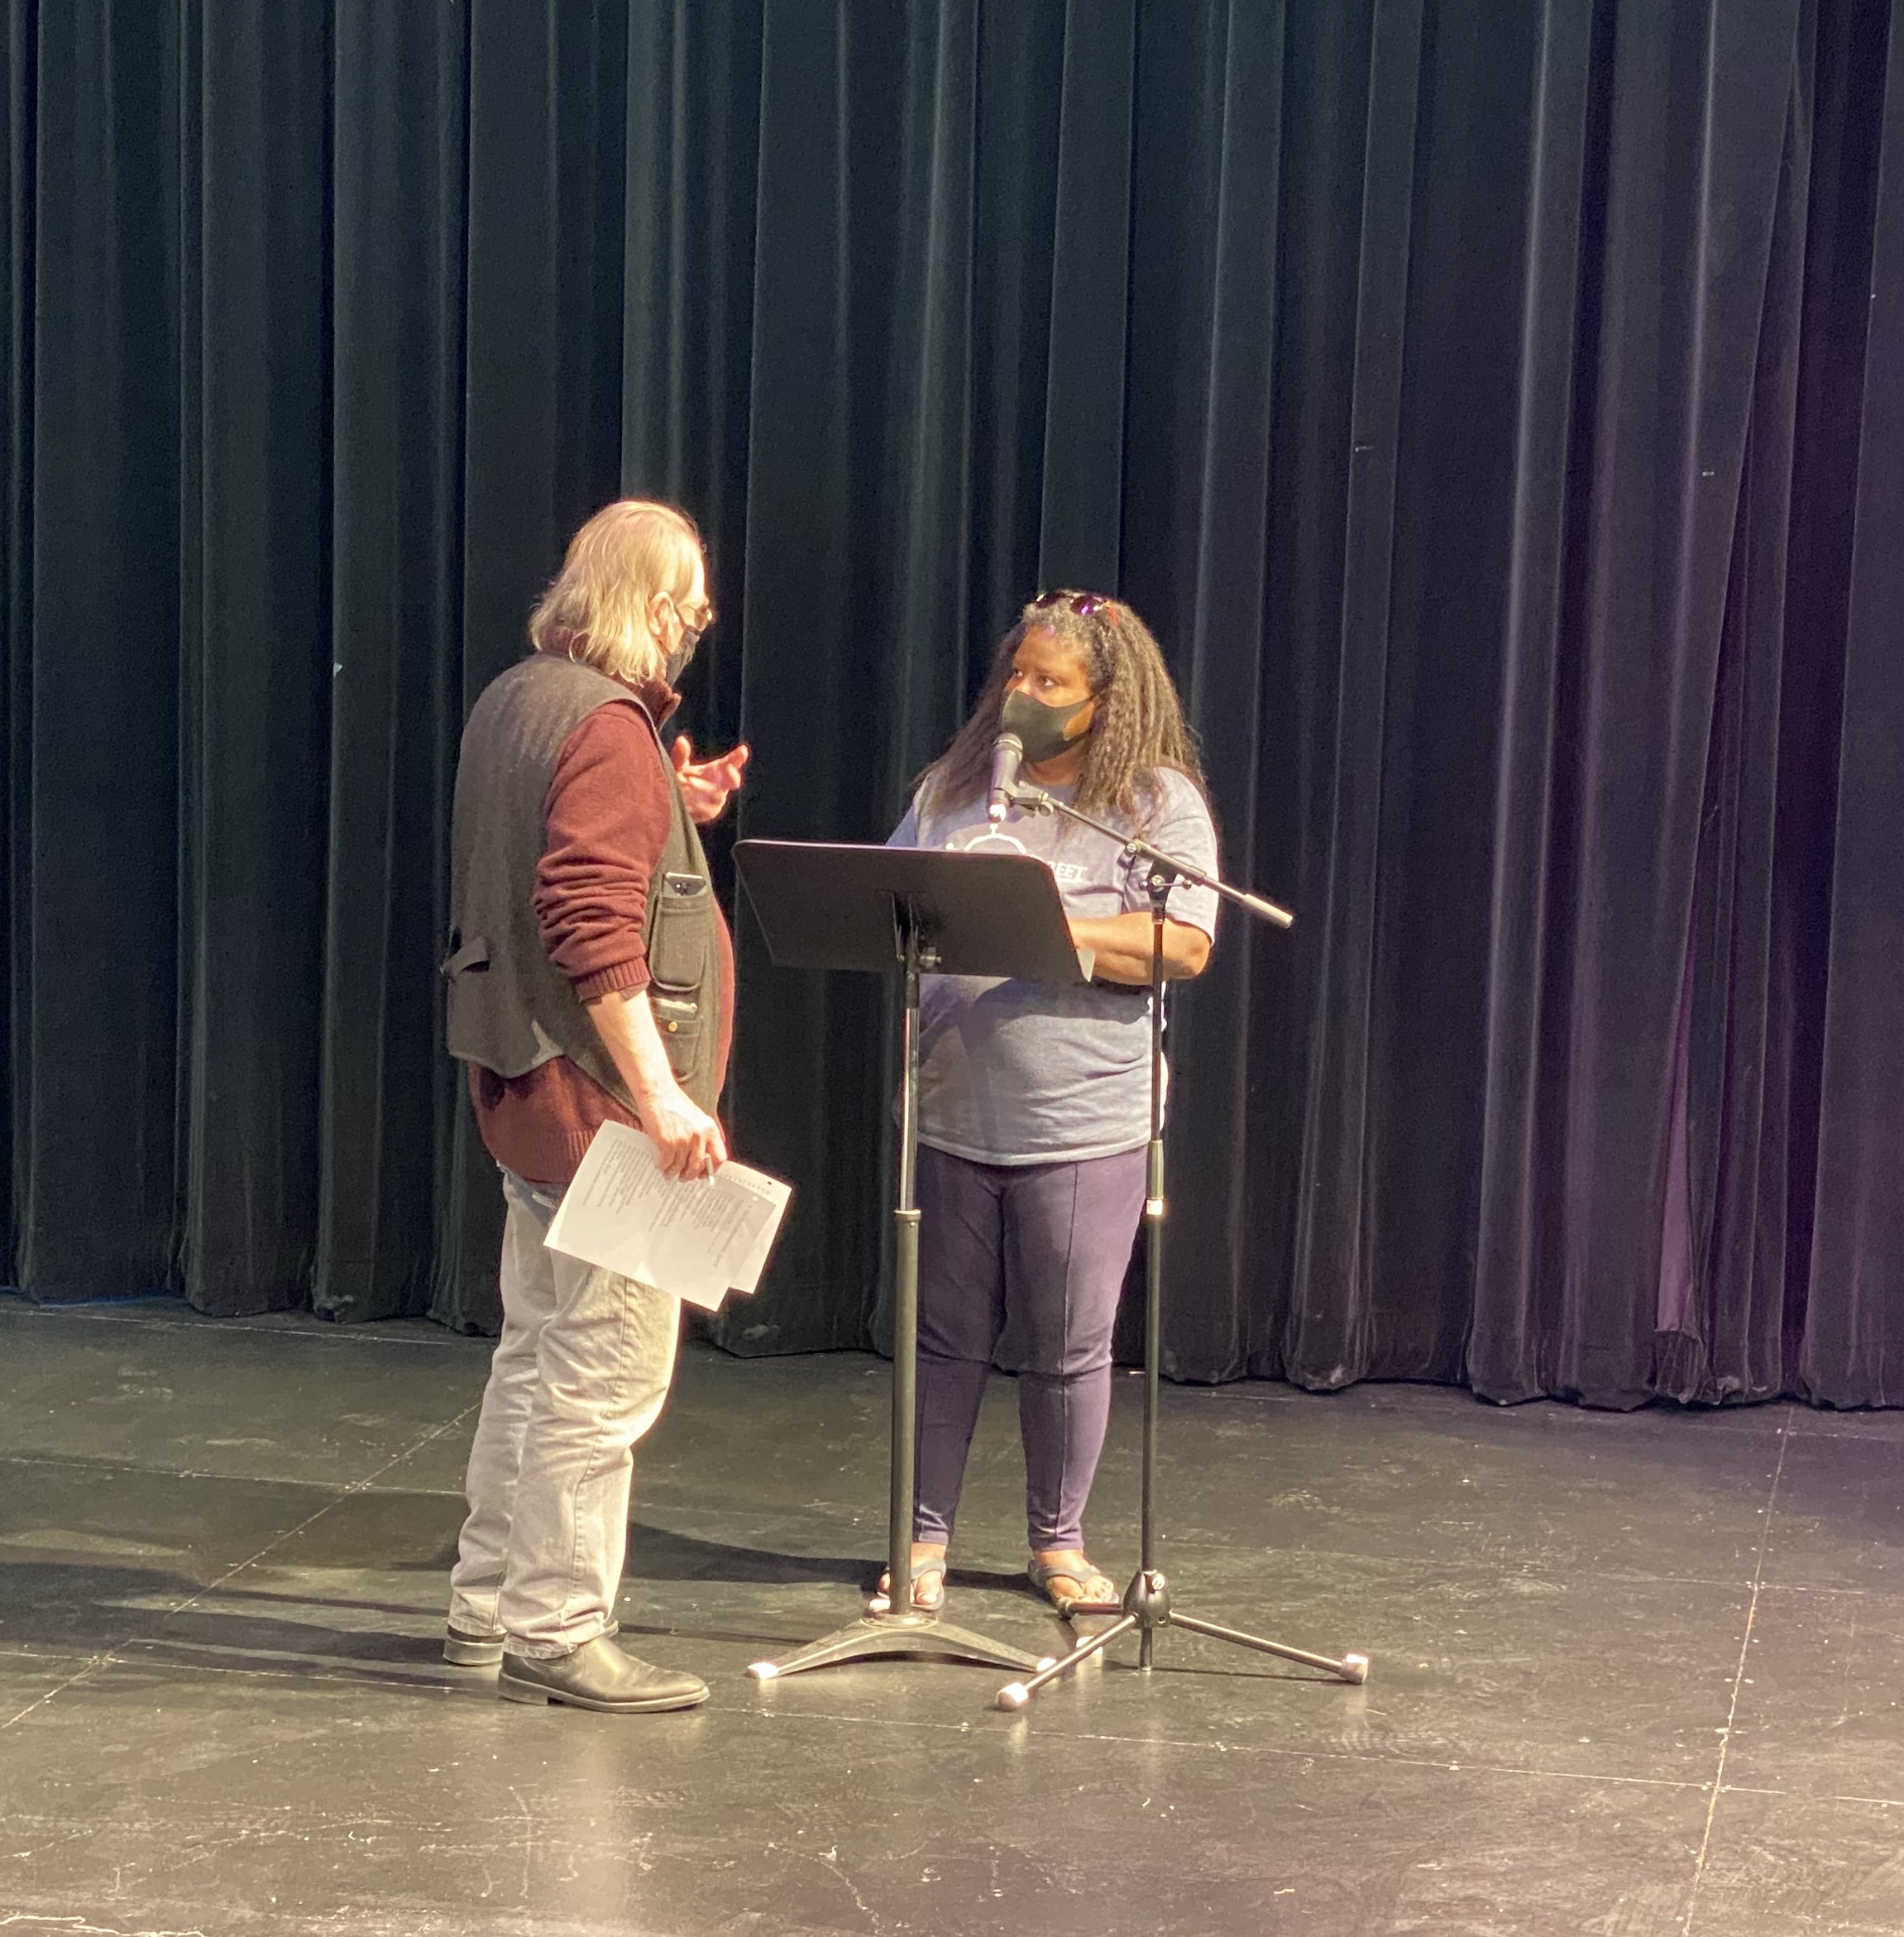 Artistic Director Kim Allen Bent stands (with pages of poem in his hand) with actor Shanda Williams (at music stand & mic) on stage at LNT, providing text analysis to Shanda